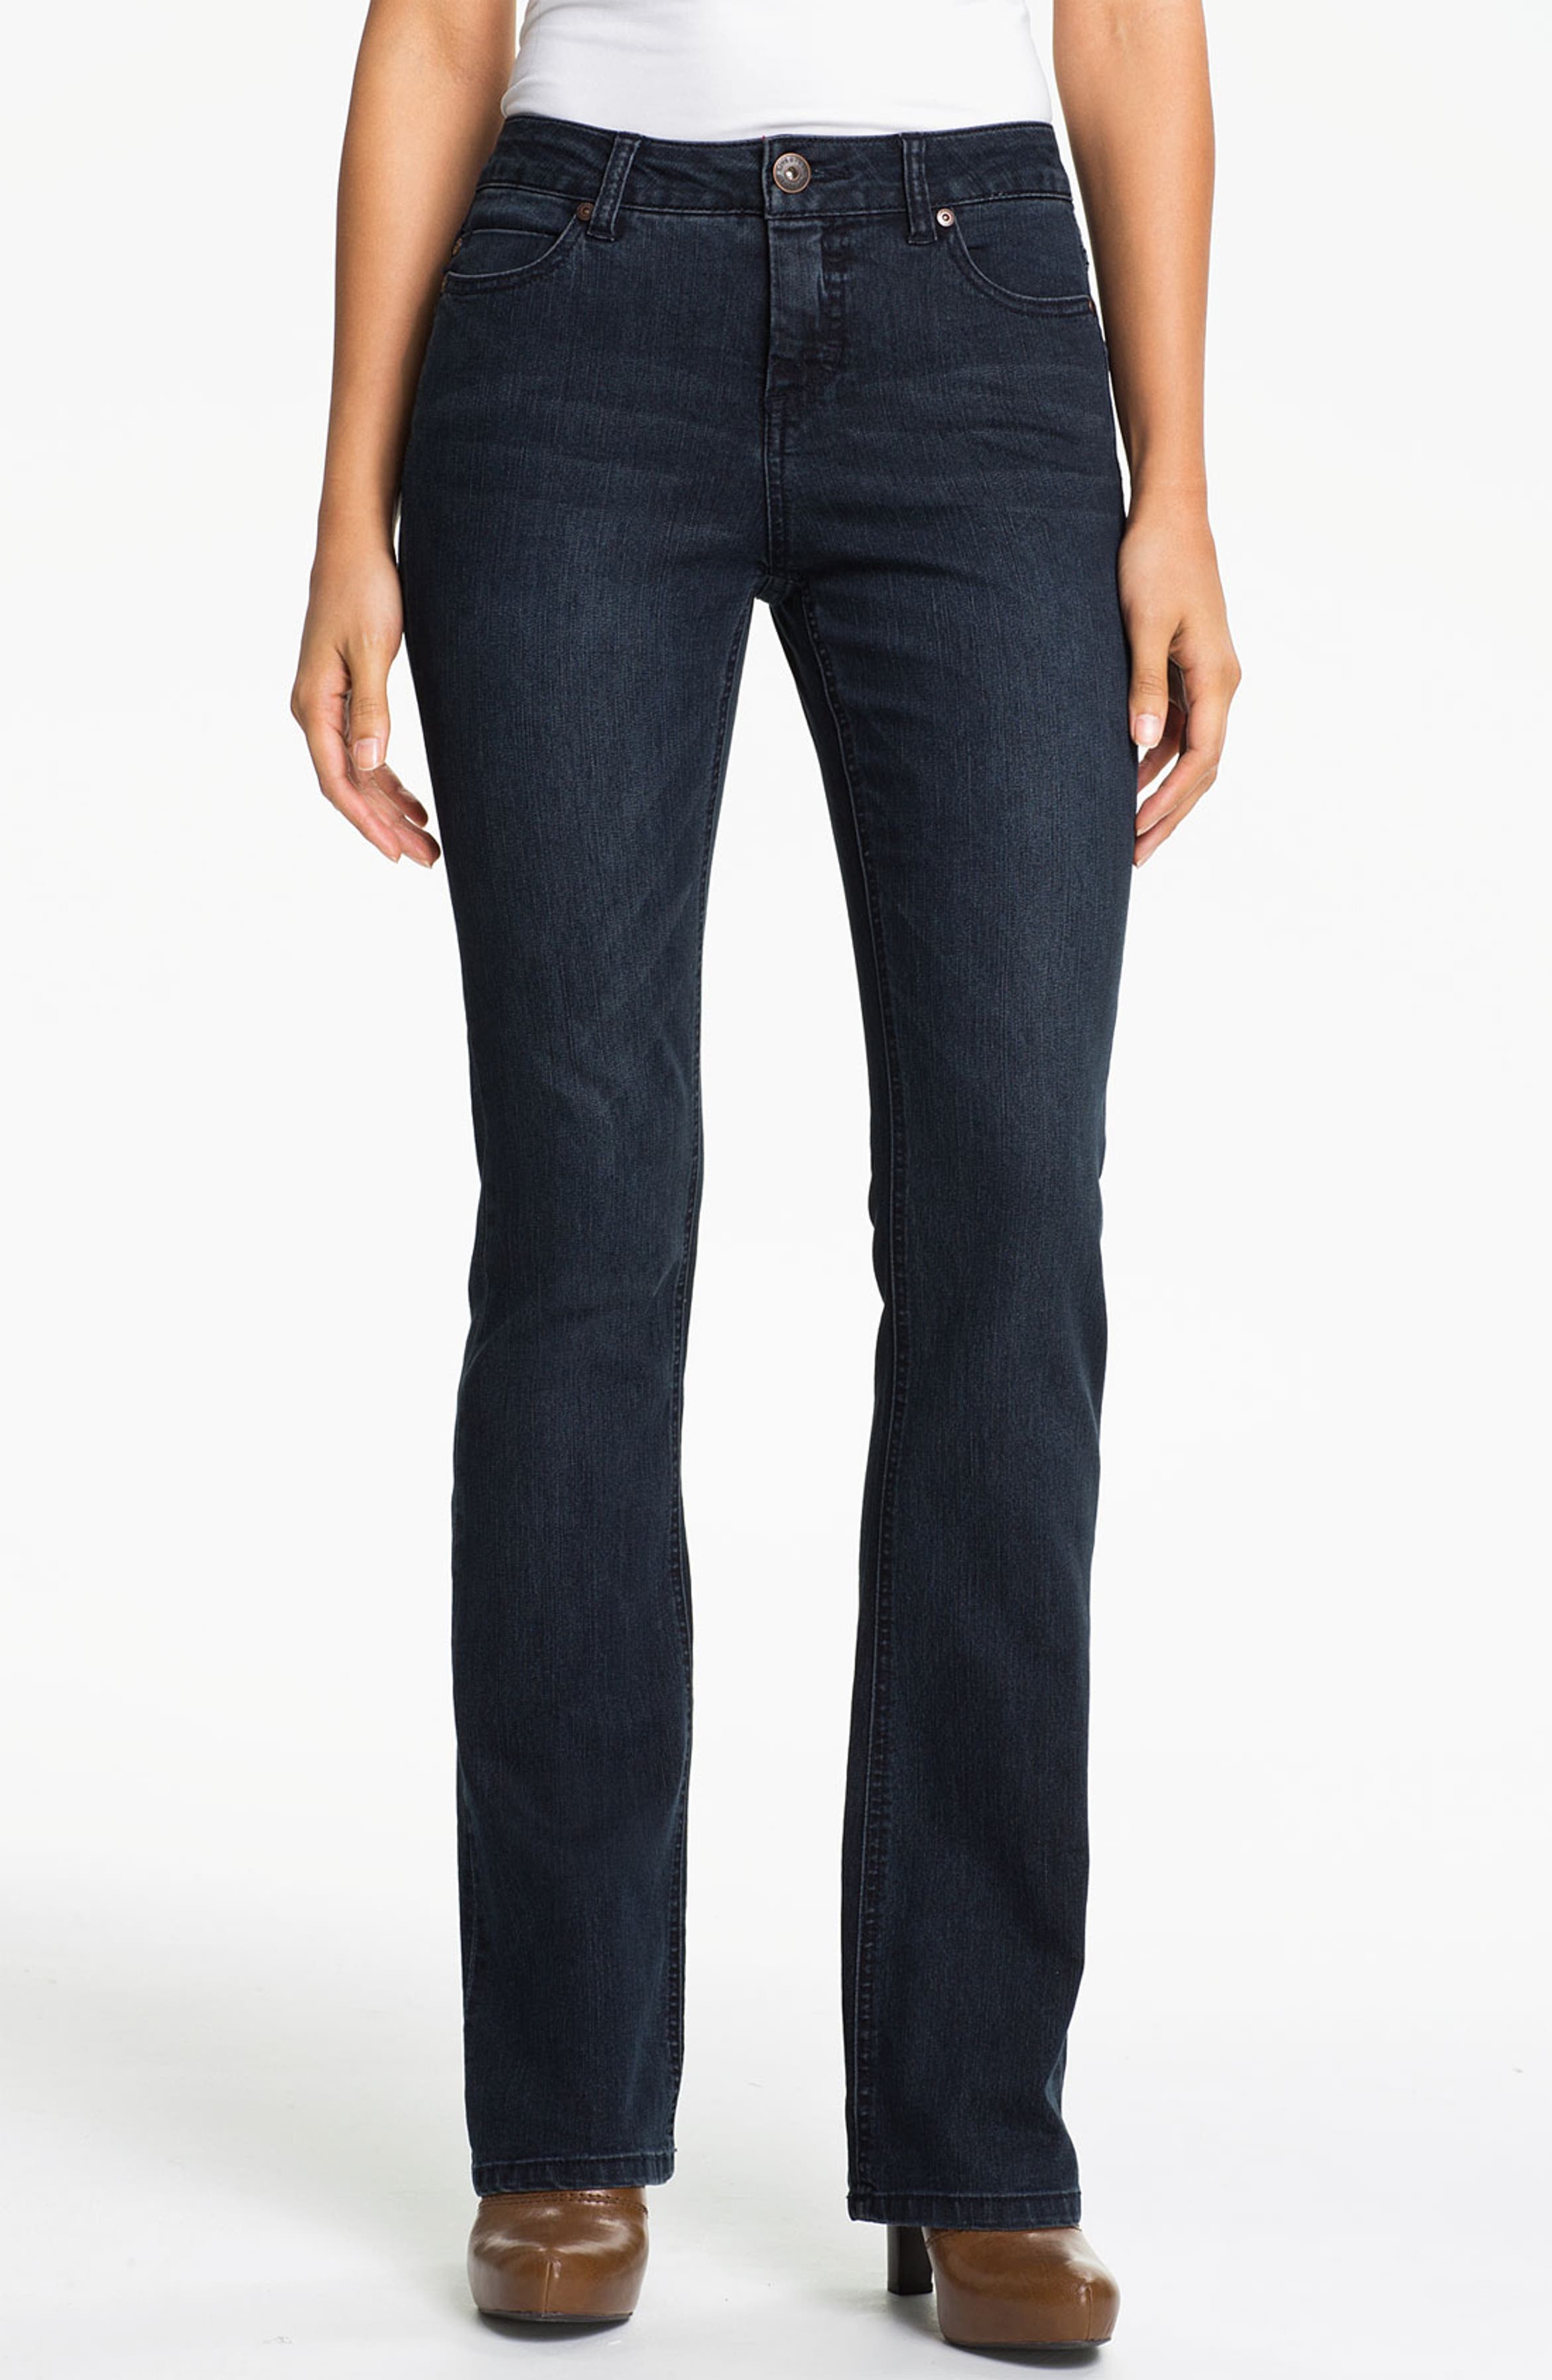 Liverpool Jeans Company 'Rita' Bootcut Stretch Jeans | Nordstrom